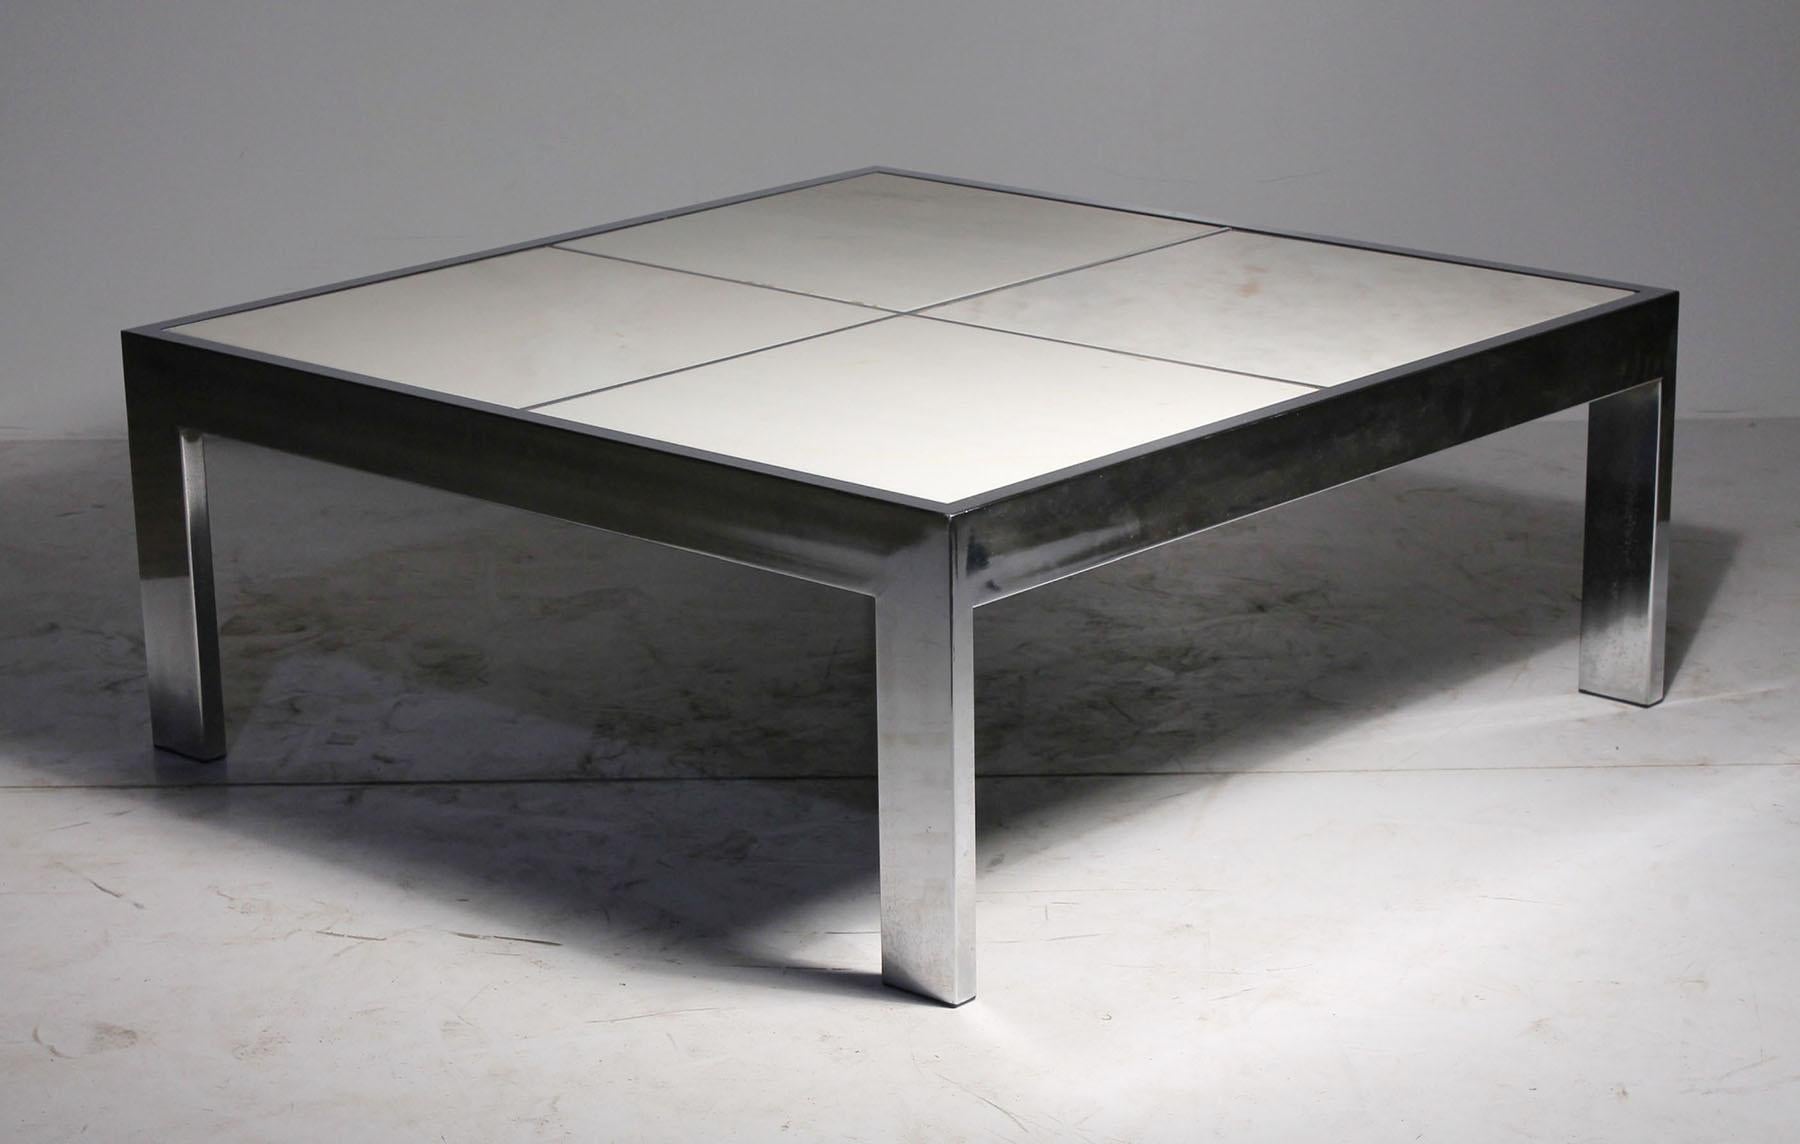 DIA coffee table with (removable/replaceable) marble square tile tops. Easily change up this table with pure white, black or red marble tops. Comes with the original white marble tops.

some light rust and pitting from age, but overall quite